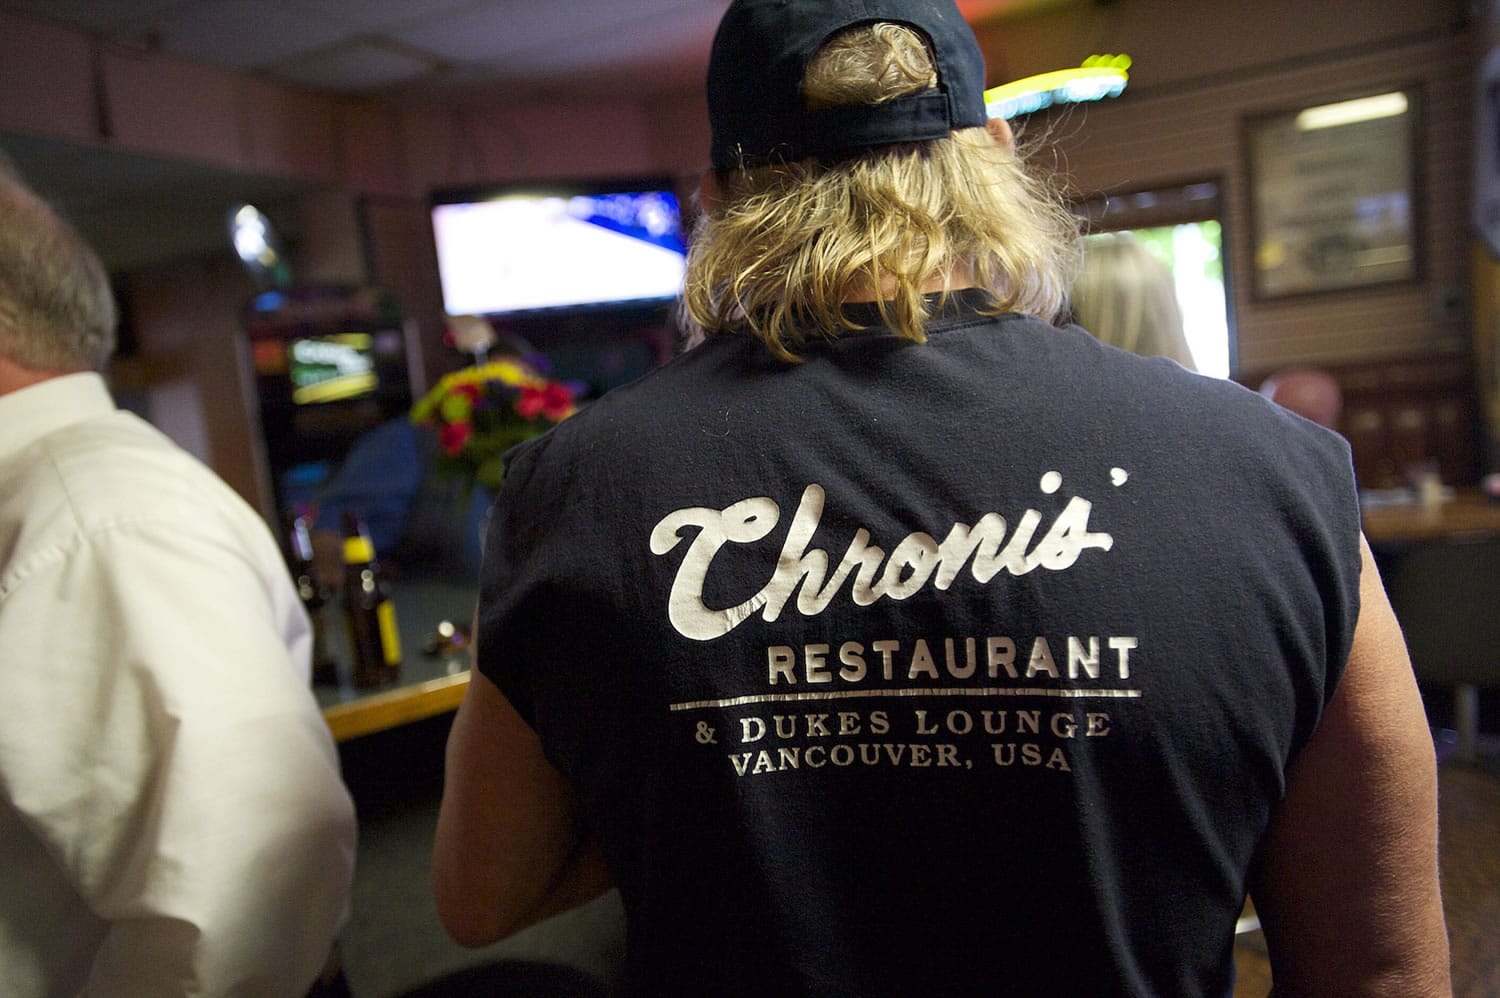 Chuck Chronis and his wife Sandy are retiring and closing their restaurant and bar.